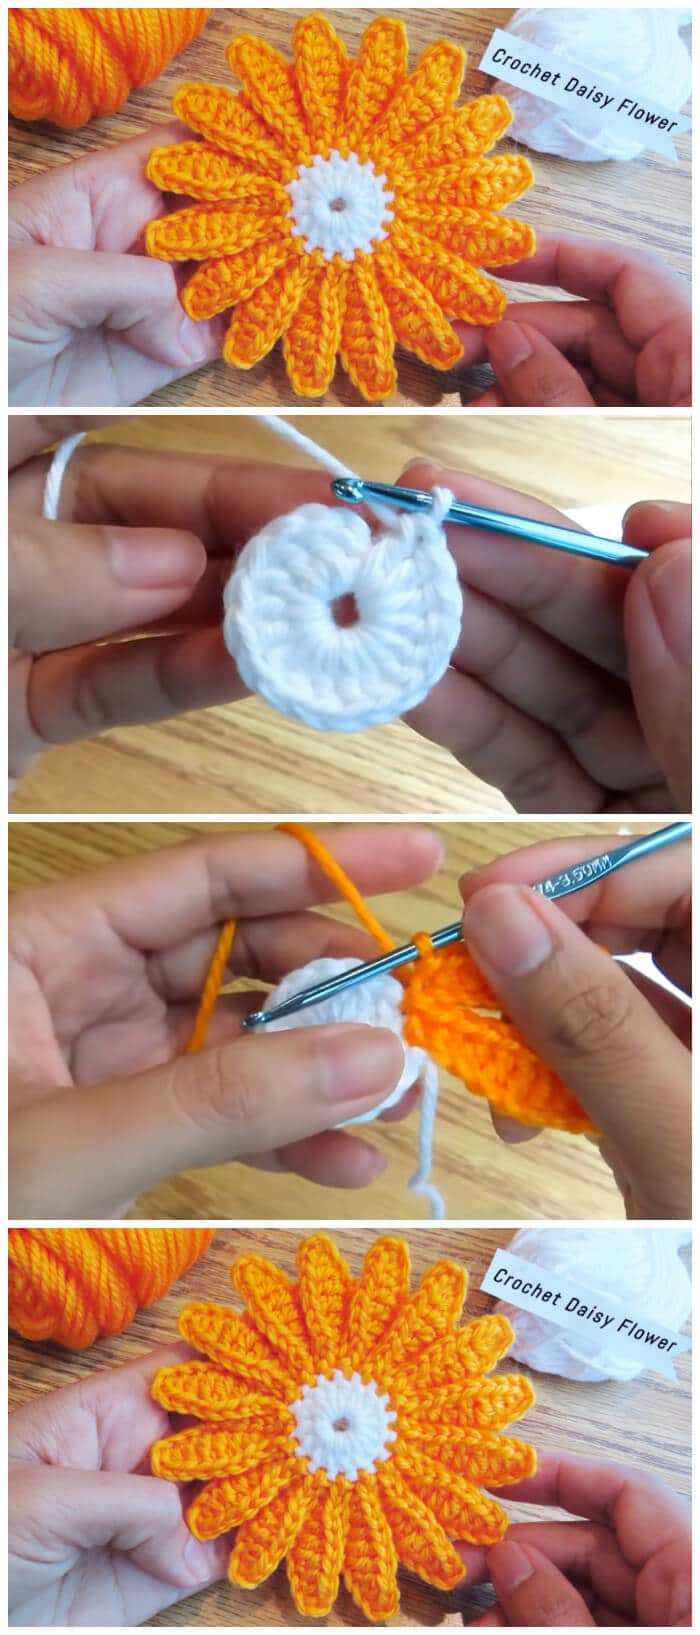   Crochet Daisy Flower  is perfect for beginners who want to give some new techniques a try, but might be a little hesitant. (Come on, we know you can do it!)  